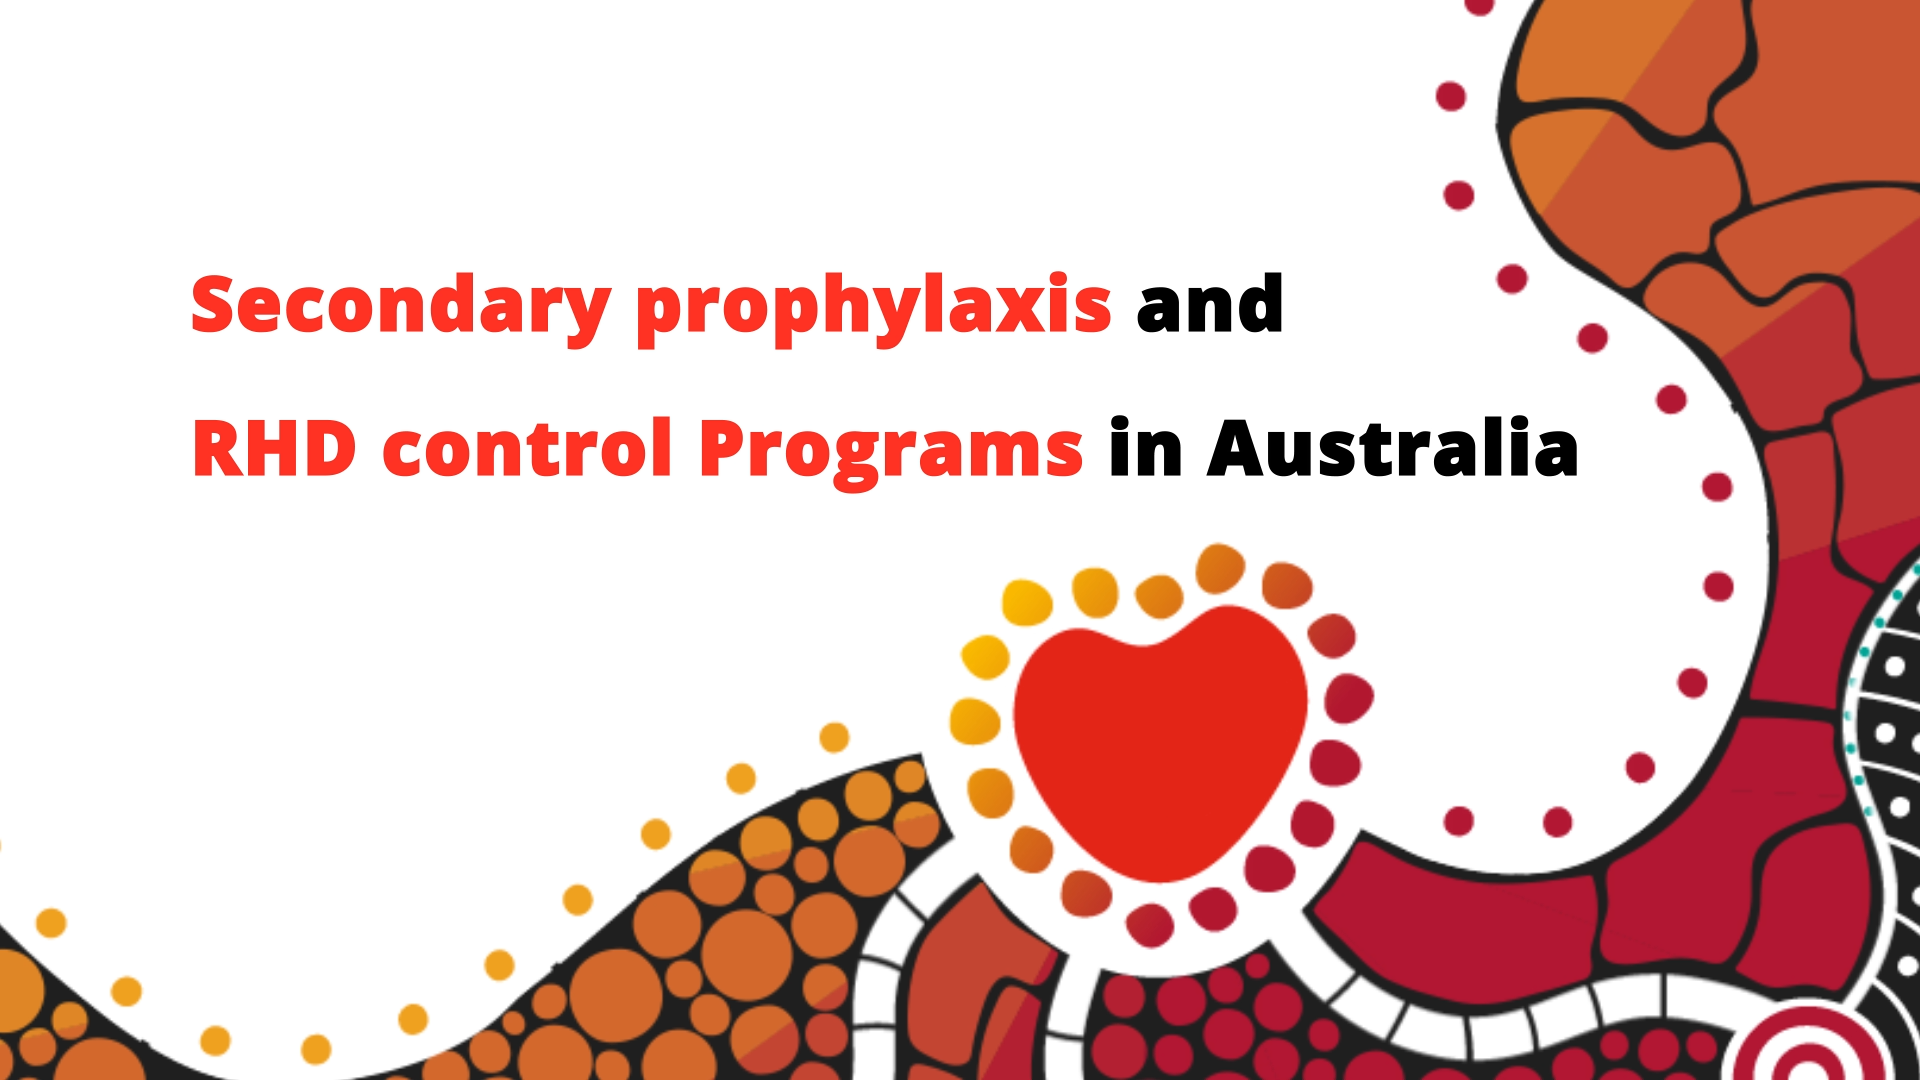 This video provides an introduction to secondary prophylaxis and rheumatic heart disease control programs and is part 4 of the Introduction to Acute Rheumatic Fever and Rheumatic Heart Disease online learning module. 